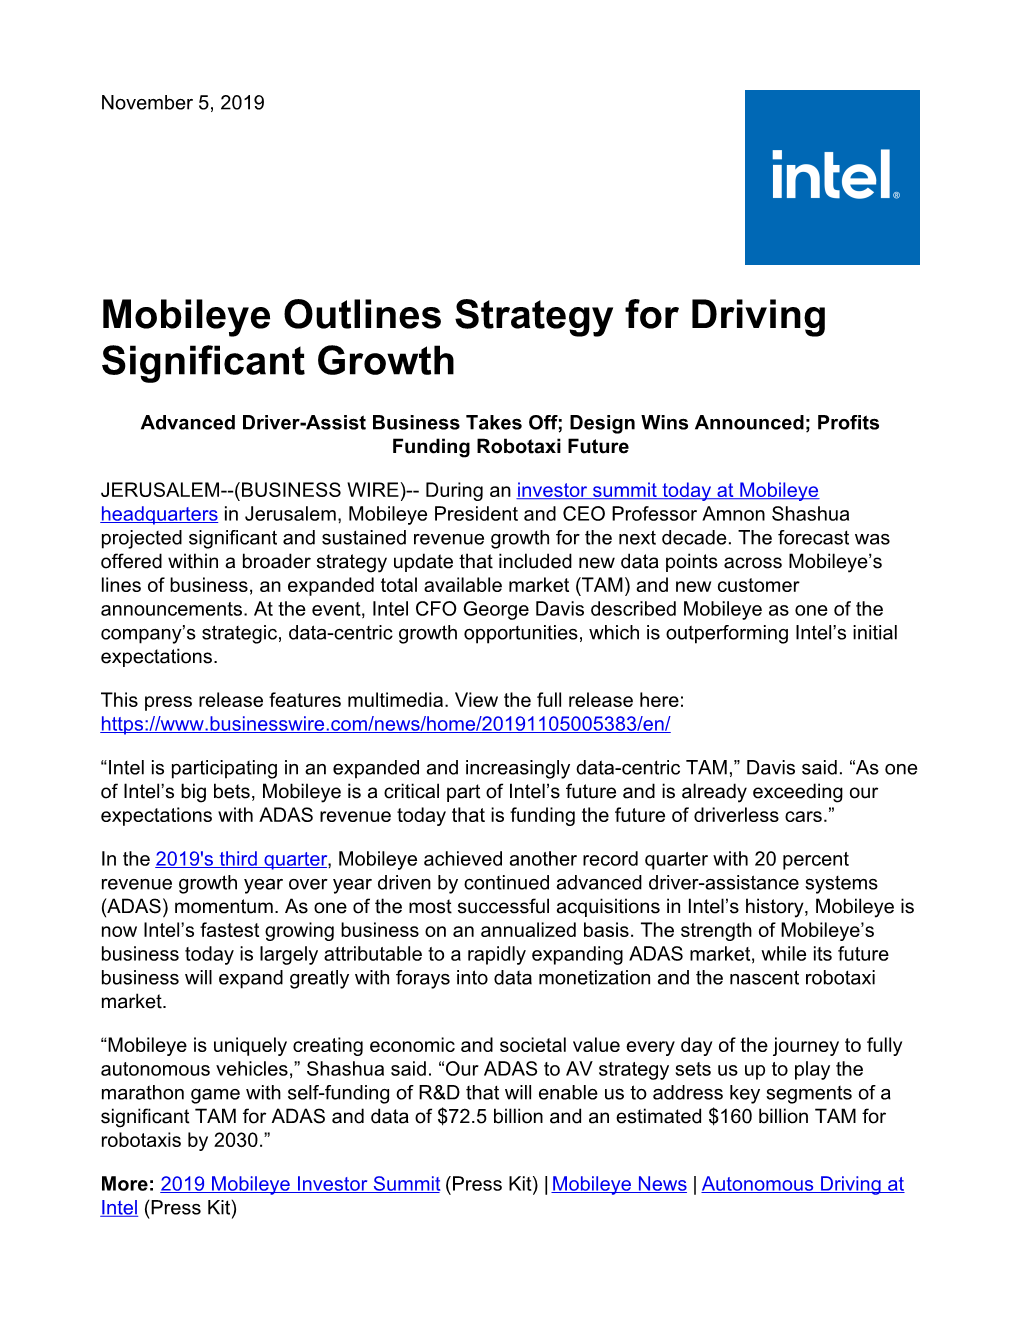 Mobileye Outlines Strategy for Driving Significant Growth